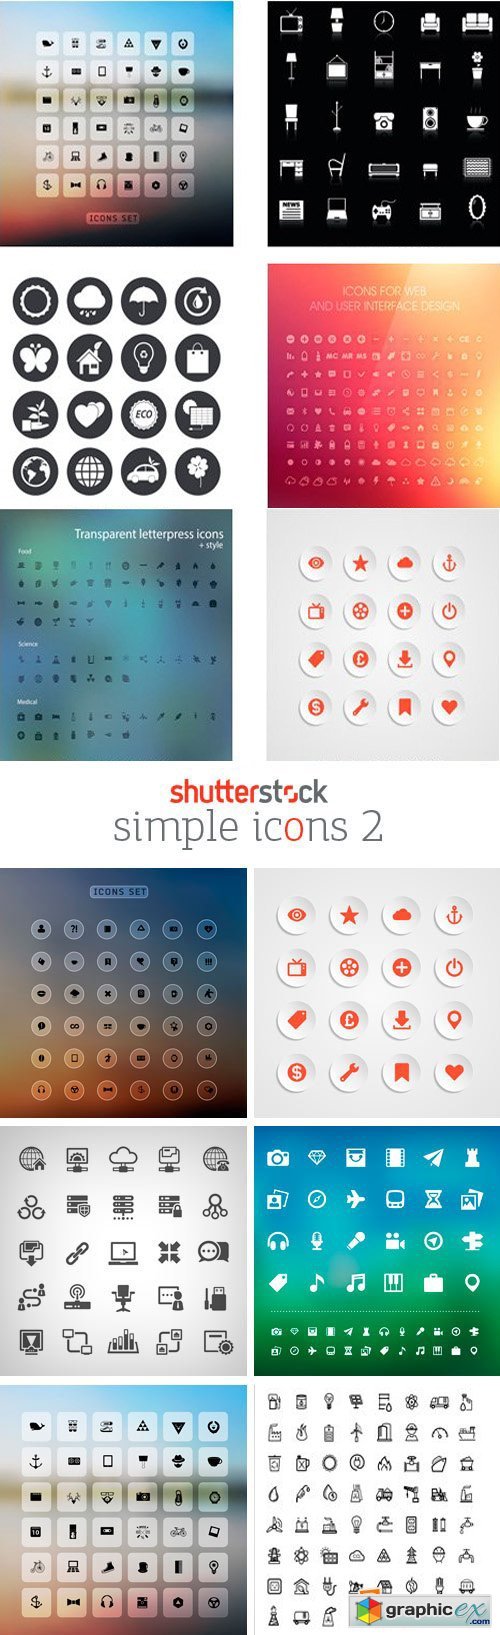 Amazing SS - Simple Icons 2, 25xEPS